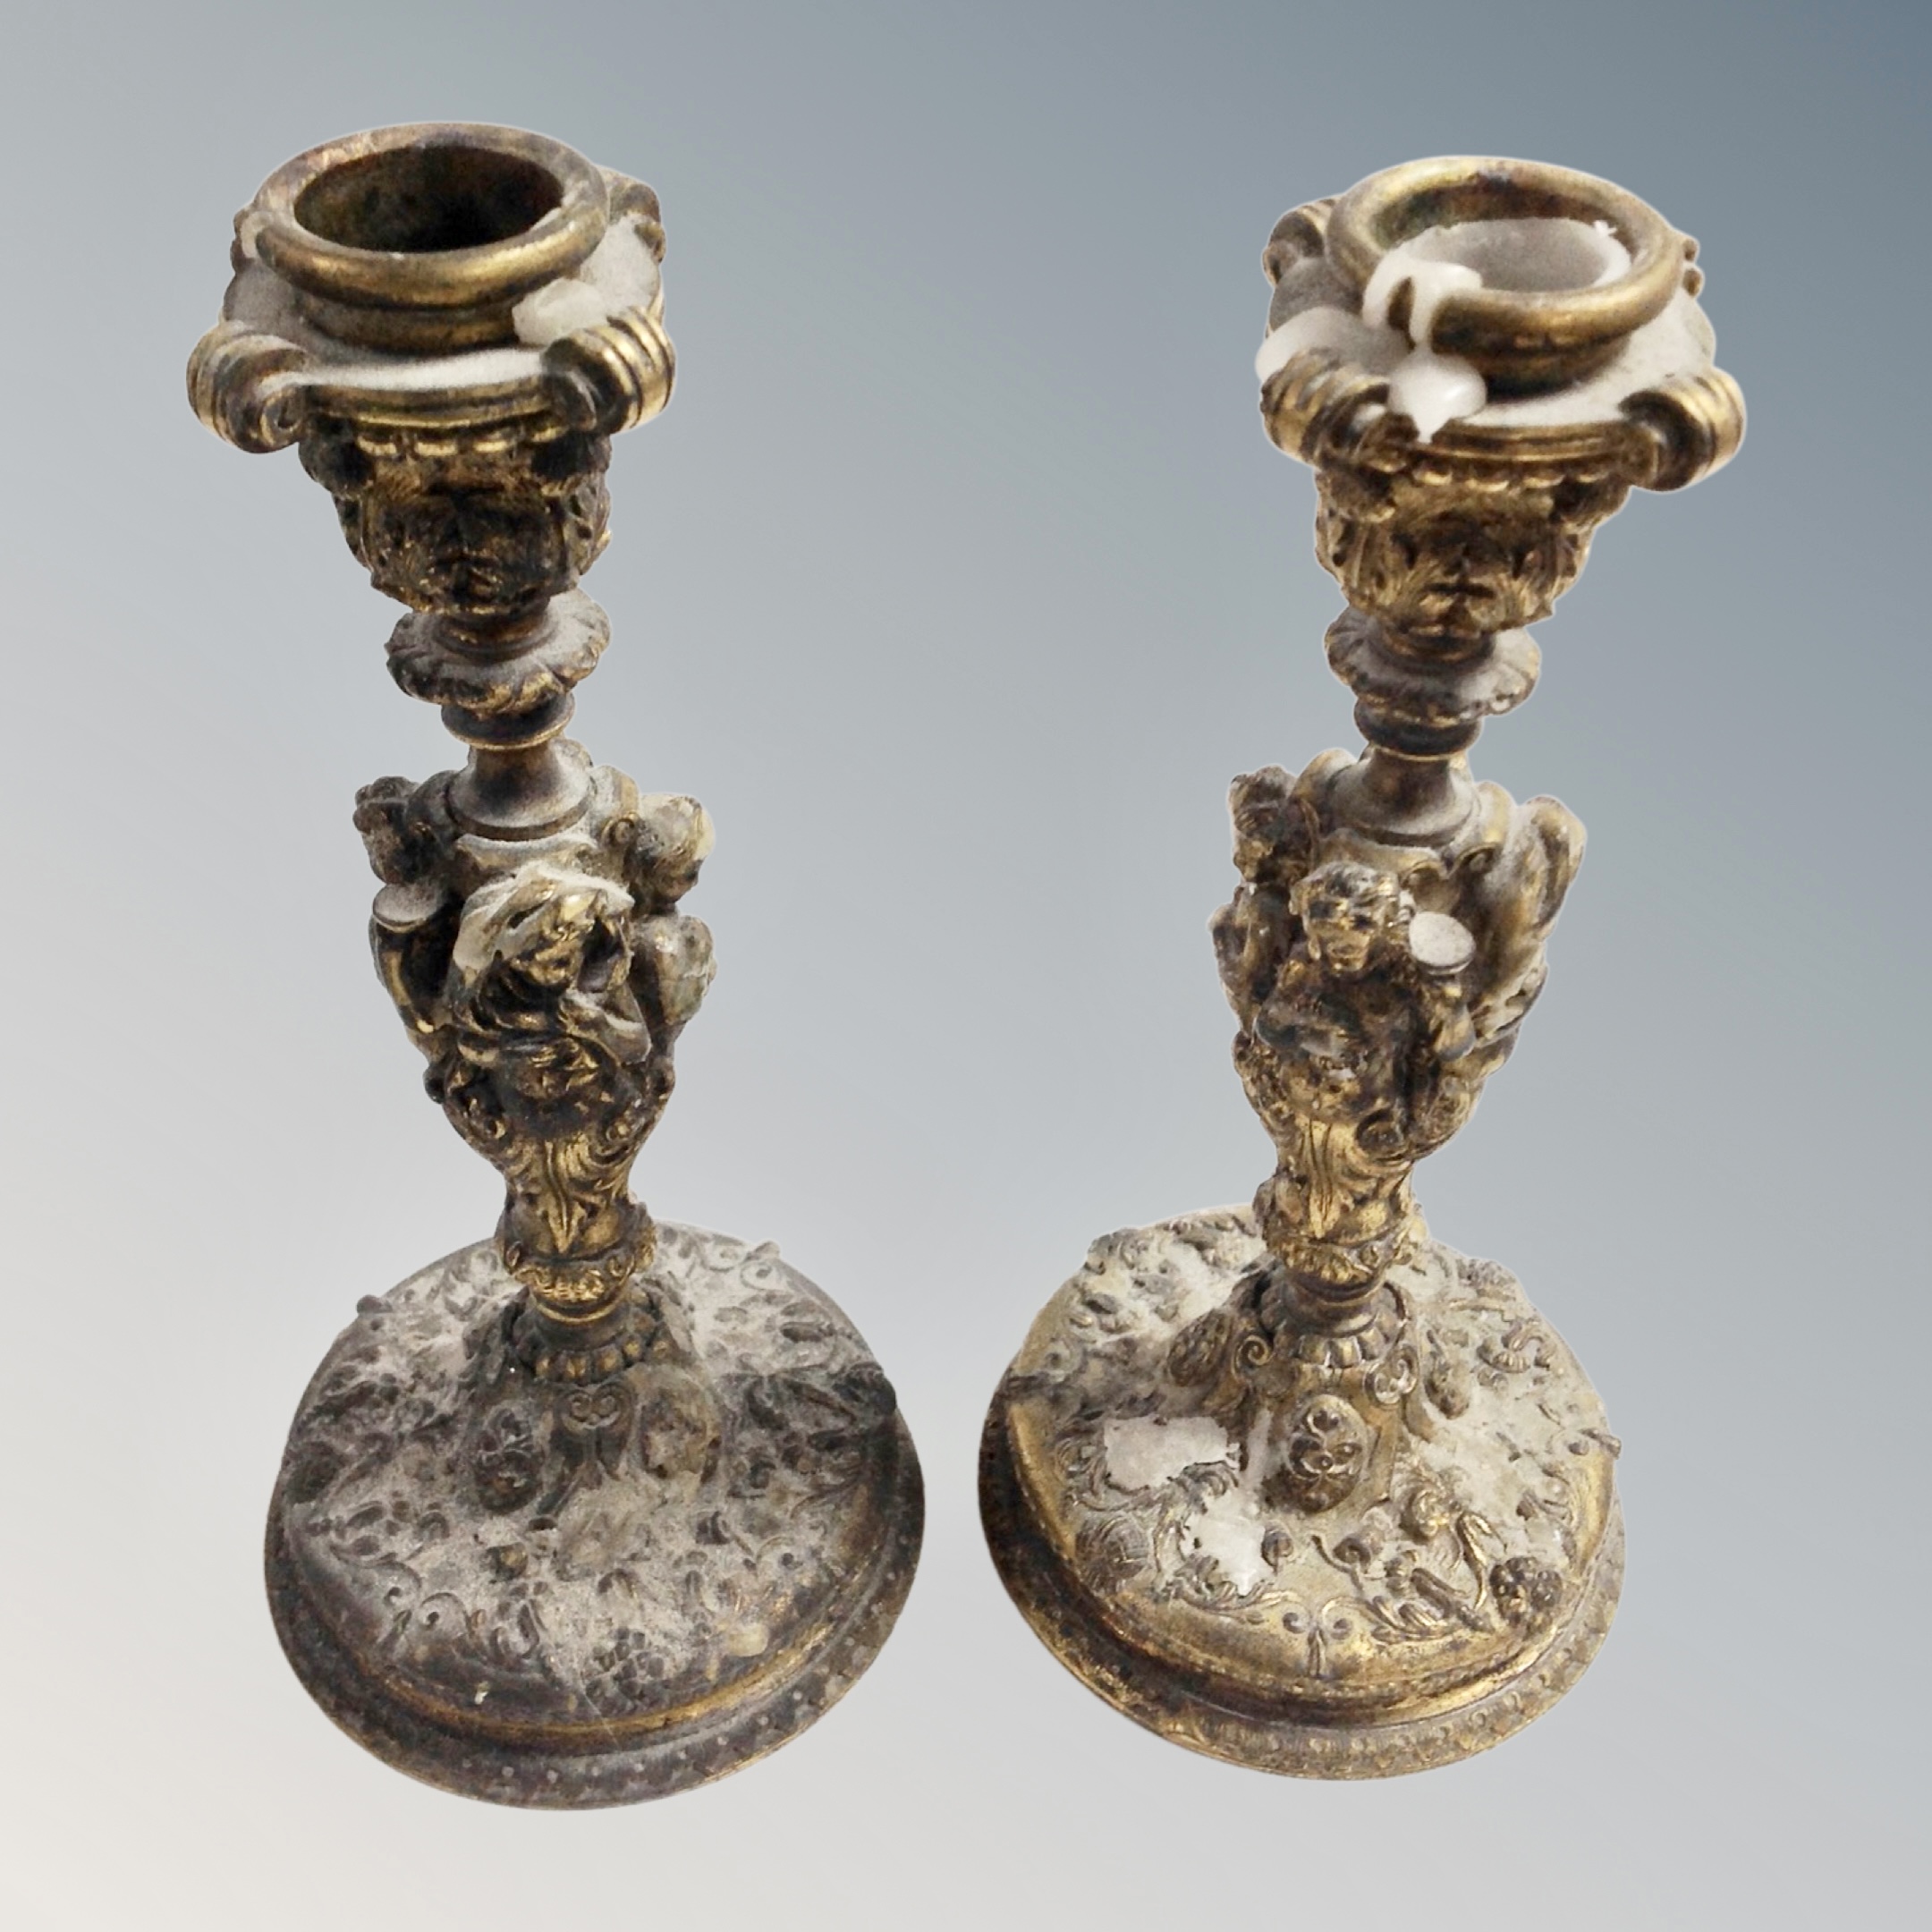 A pair of 19th century cast and gilt bronze candlesticks, height 28.